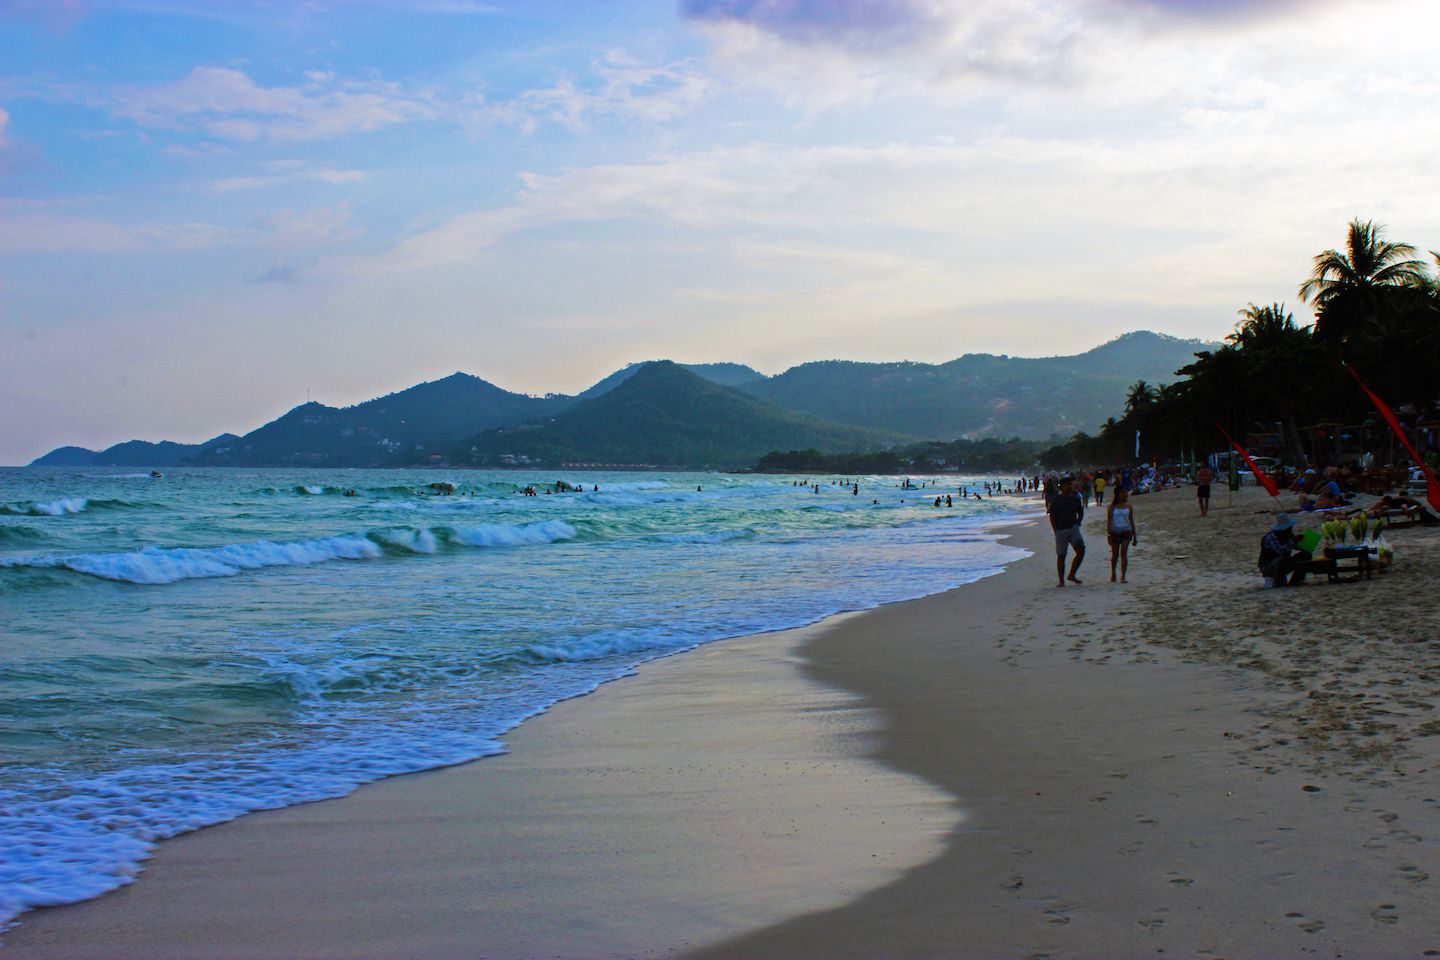 View of Chaweng Beach in Koh Samui, Thailand